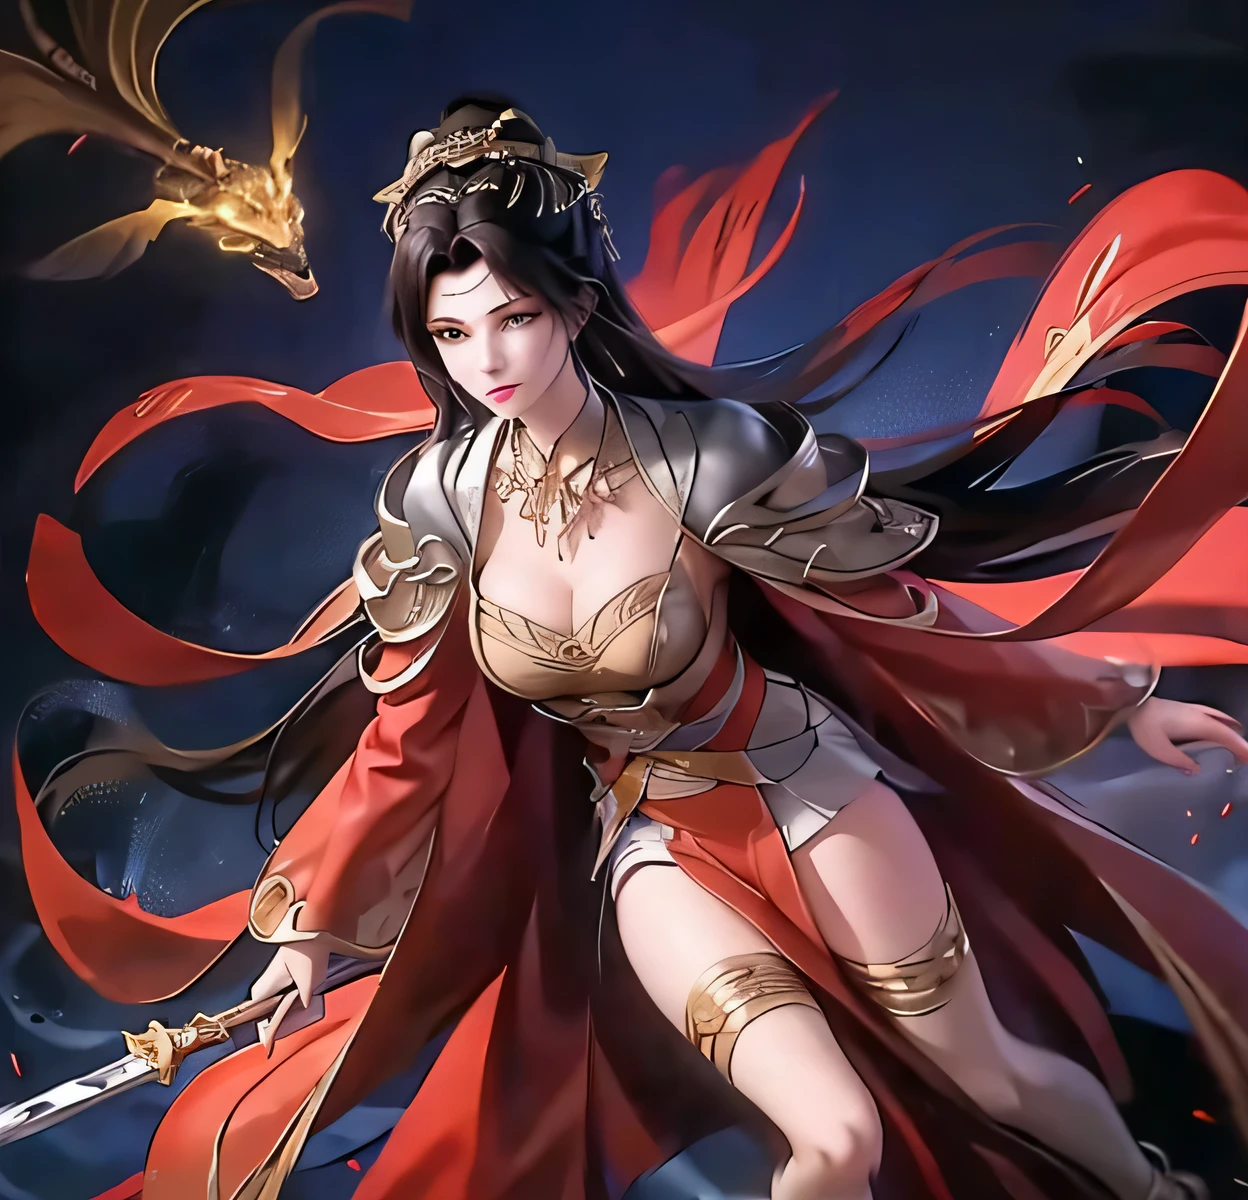 A woman in red clothes carries a sword on her back, xianxia hero, inspired by trees, full body xianxia, Inspired by Du Qiong, bian lian, Inspired by Cao Zhibai, Inspired by Zhu Lian, Inspired by Puhua, Inspired by Zhou Fang, lady in red armor, Queen of the Sea Mu Yanling